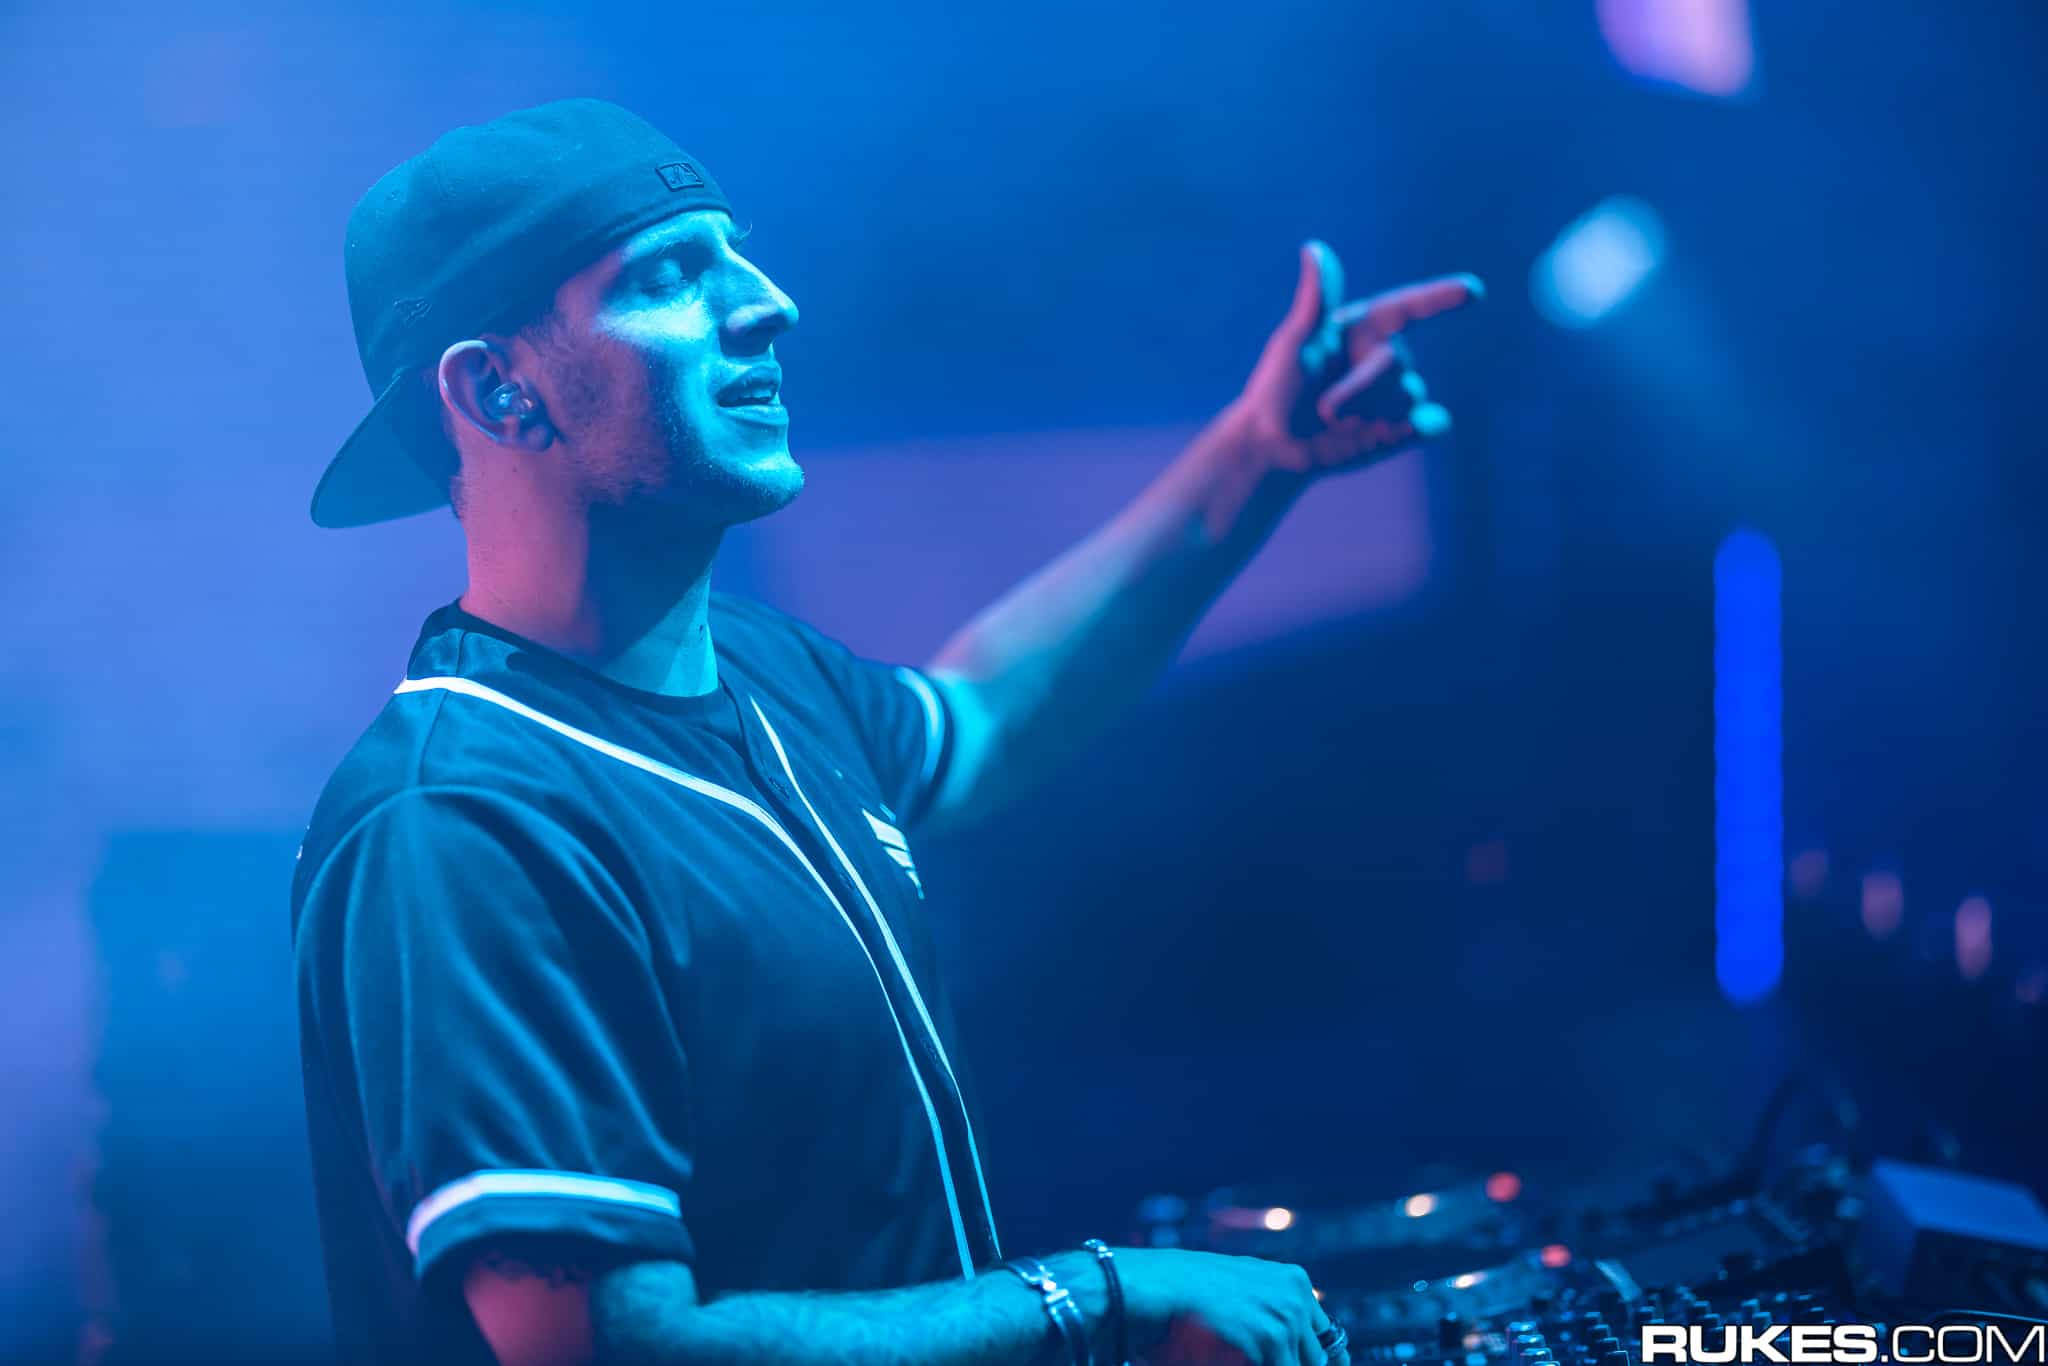 ILLENIUM teams up with pop talent MAX for moving single "Worst Day": Listen